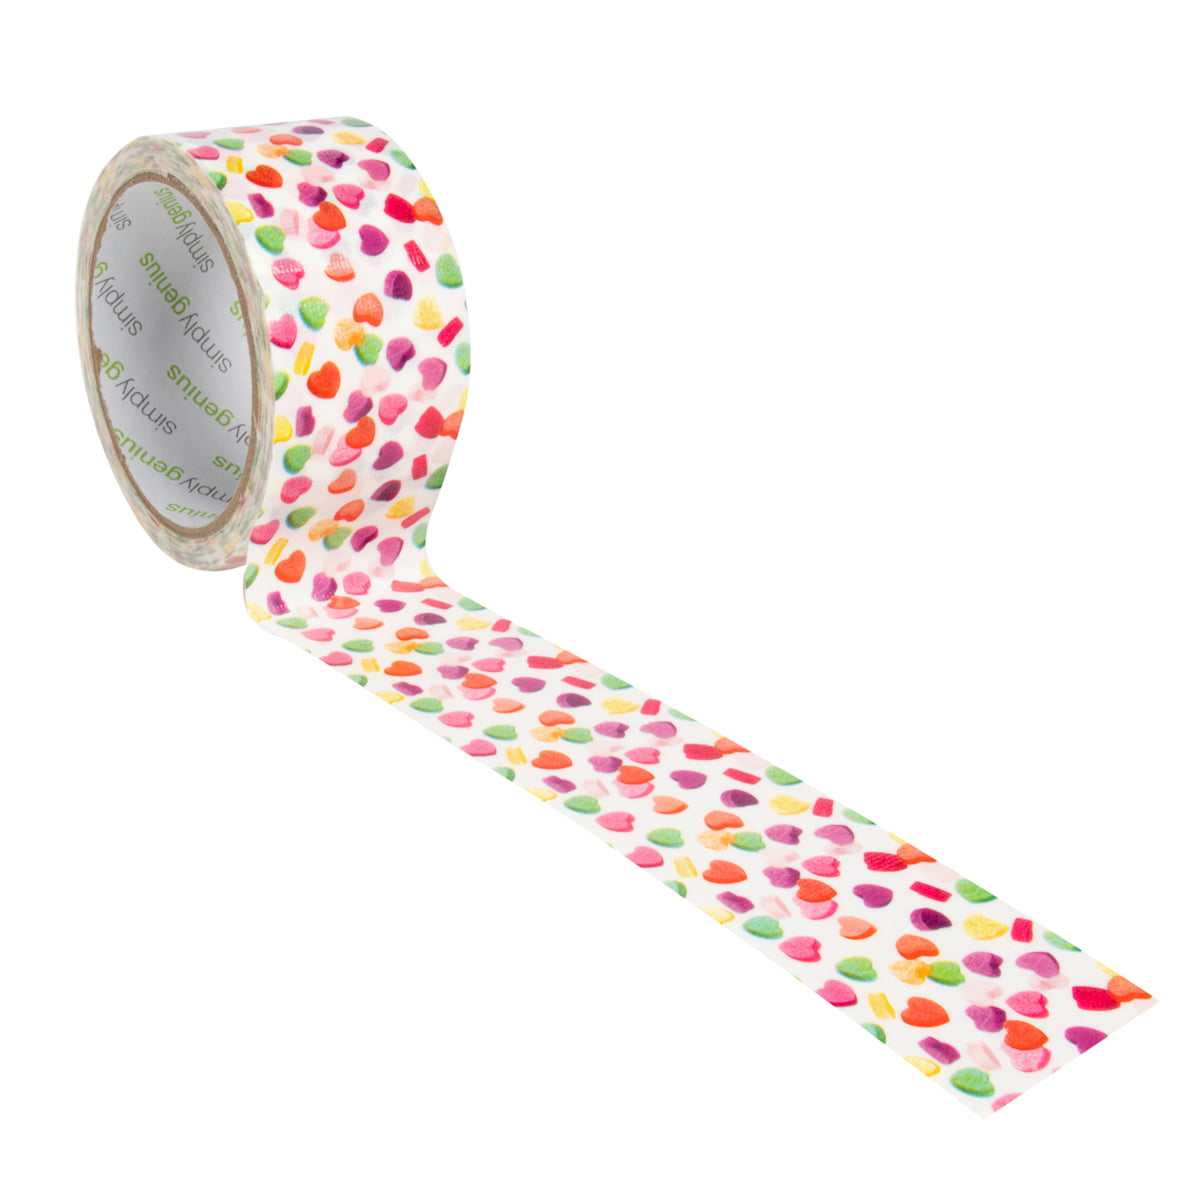 RUNROTOO 3 Rolls Colored Duct Tape Seam Tape Upholstery Tape Gift